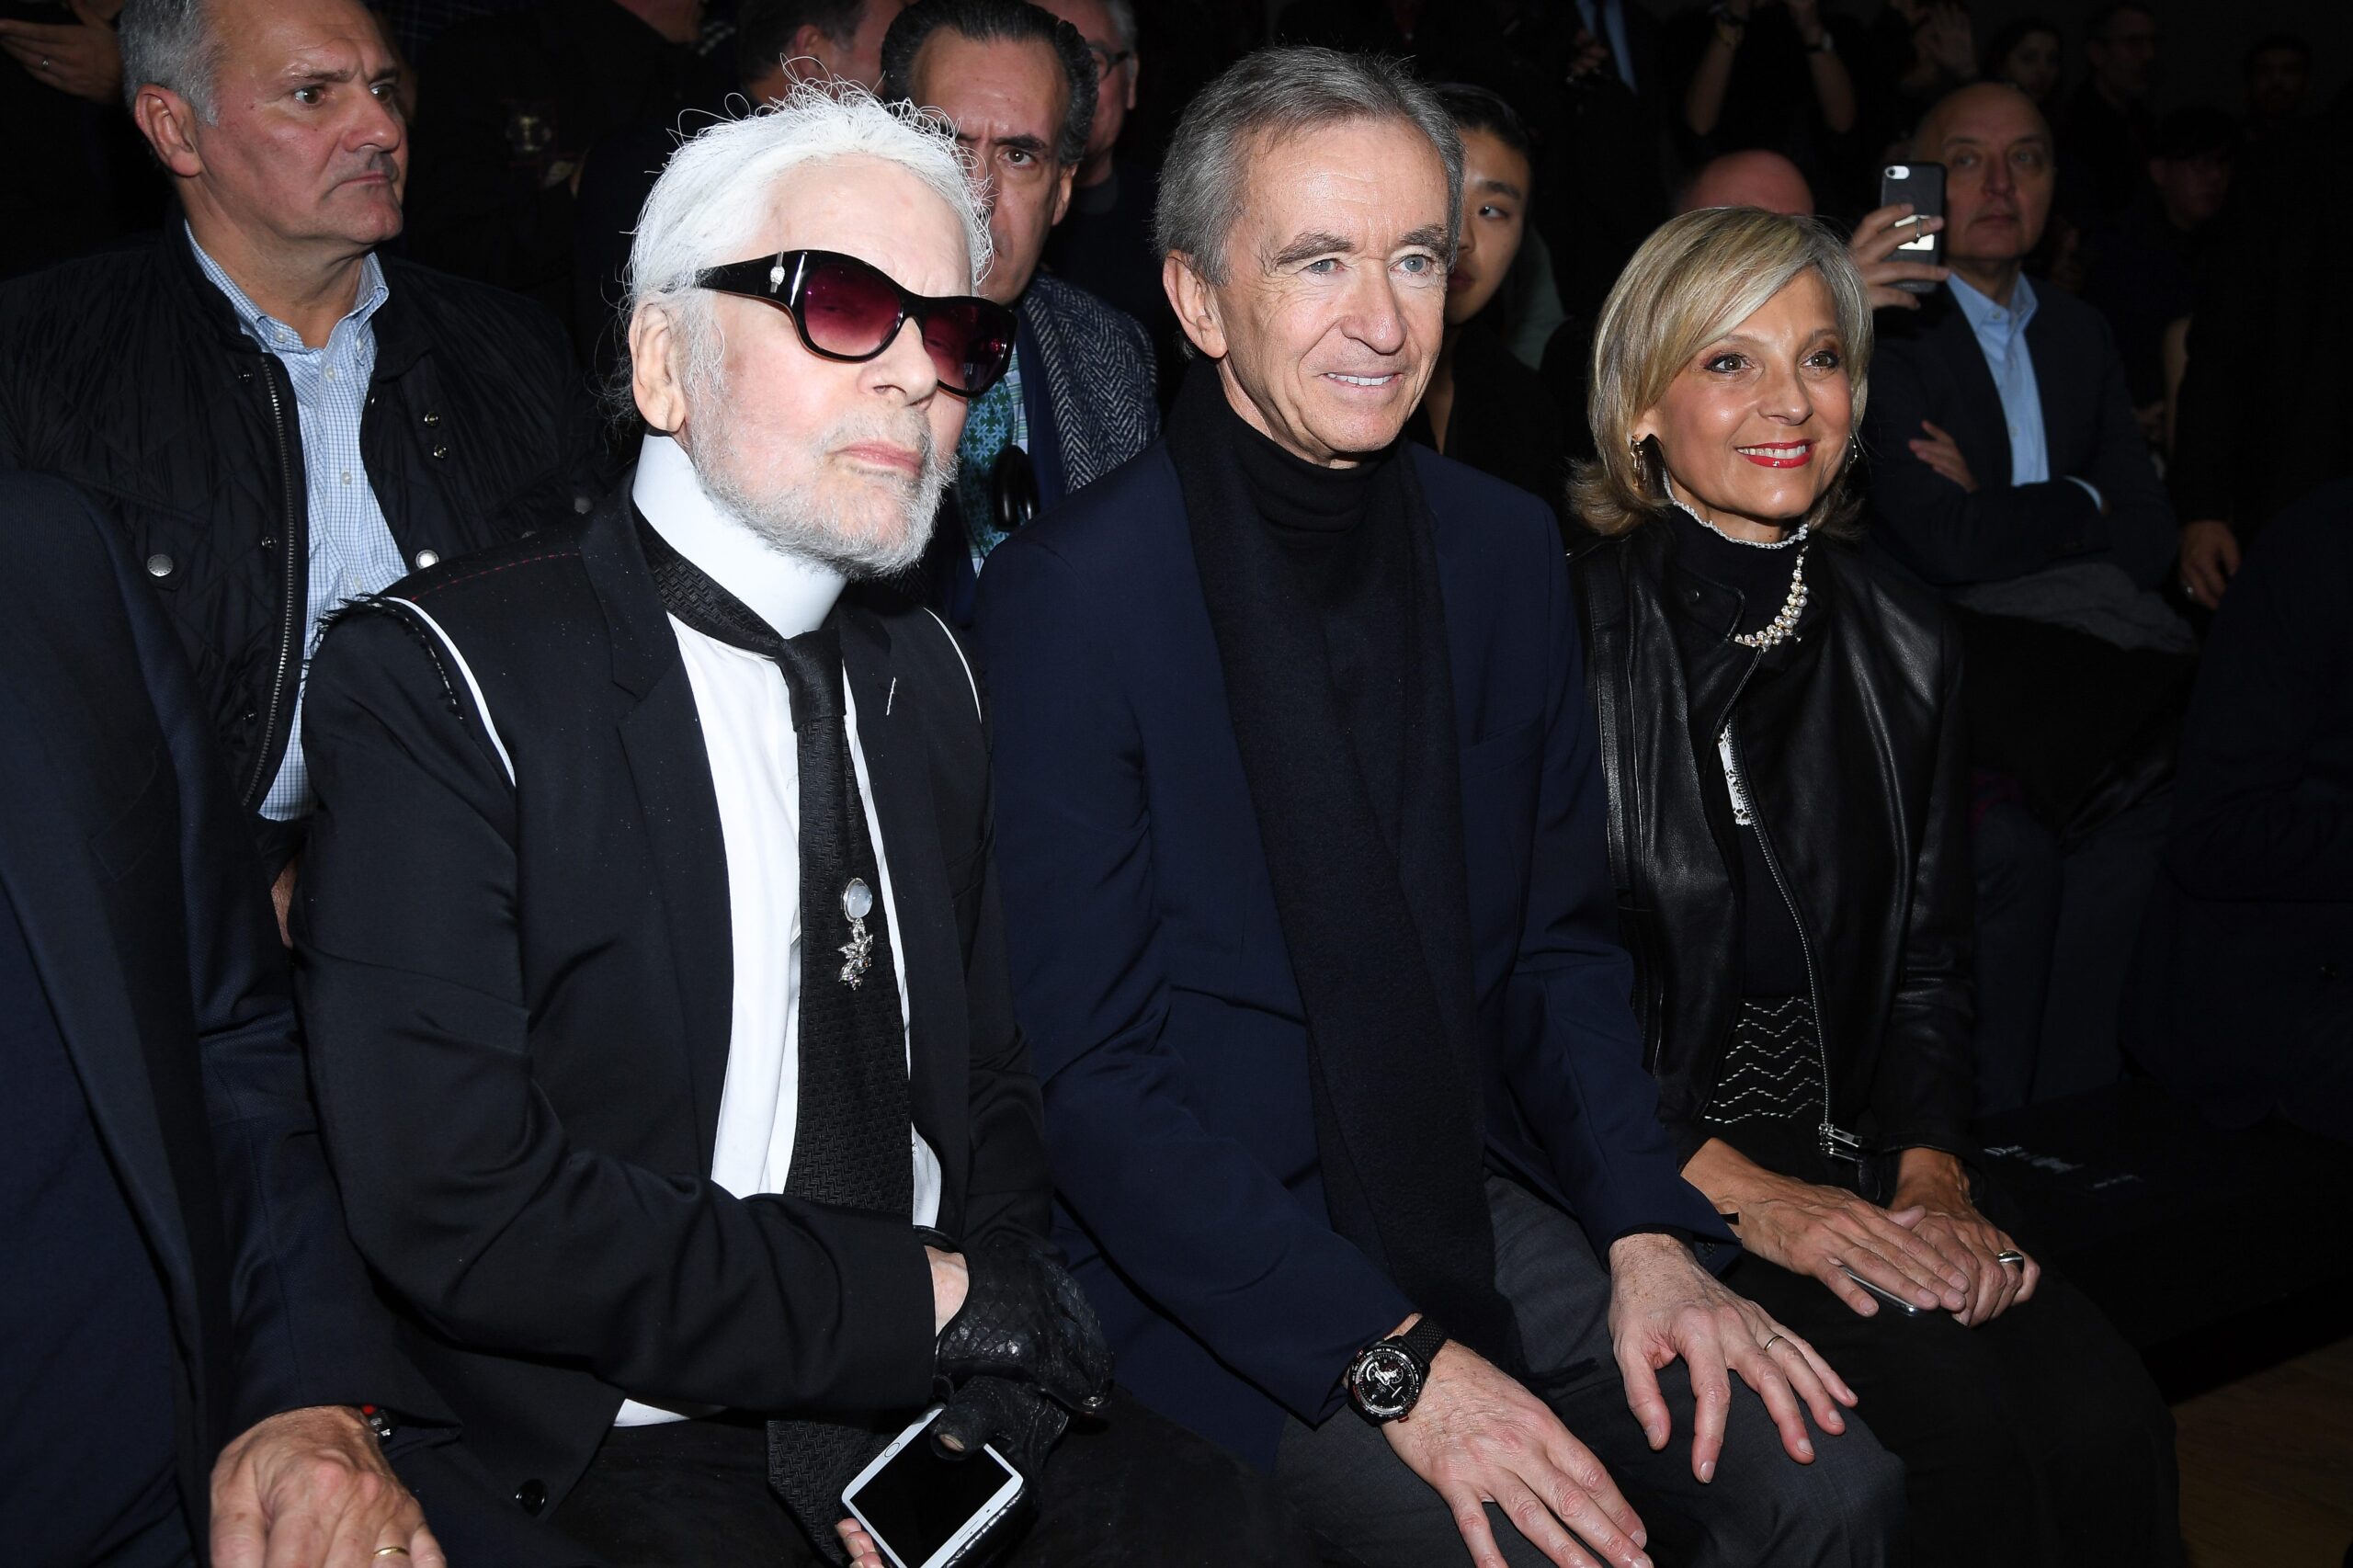 Bernard Arnault  and his wife sat next to Karl Lagerfeld